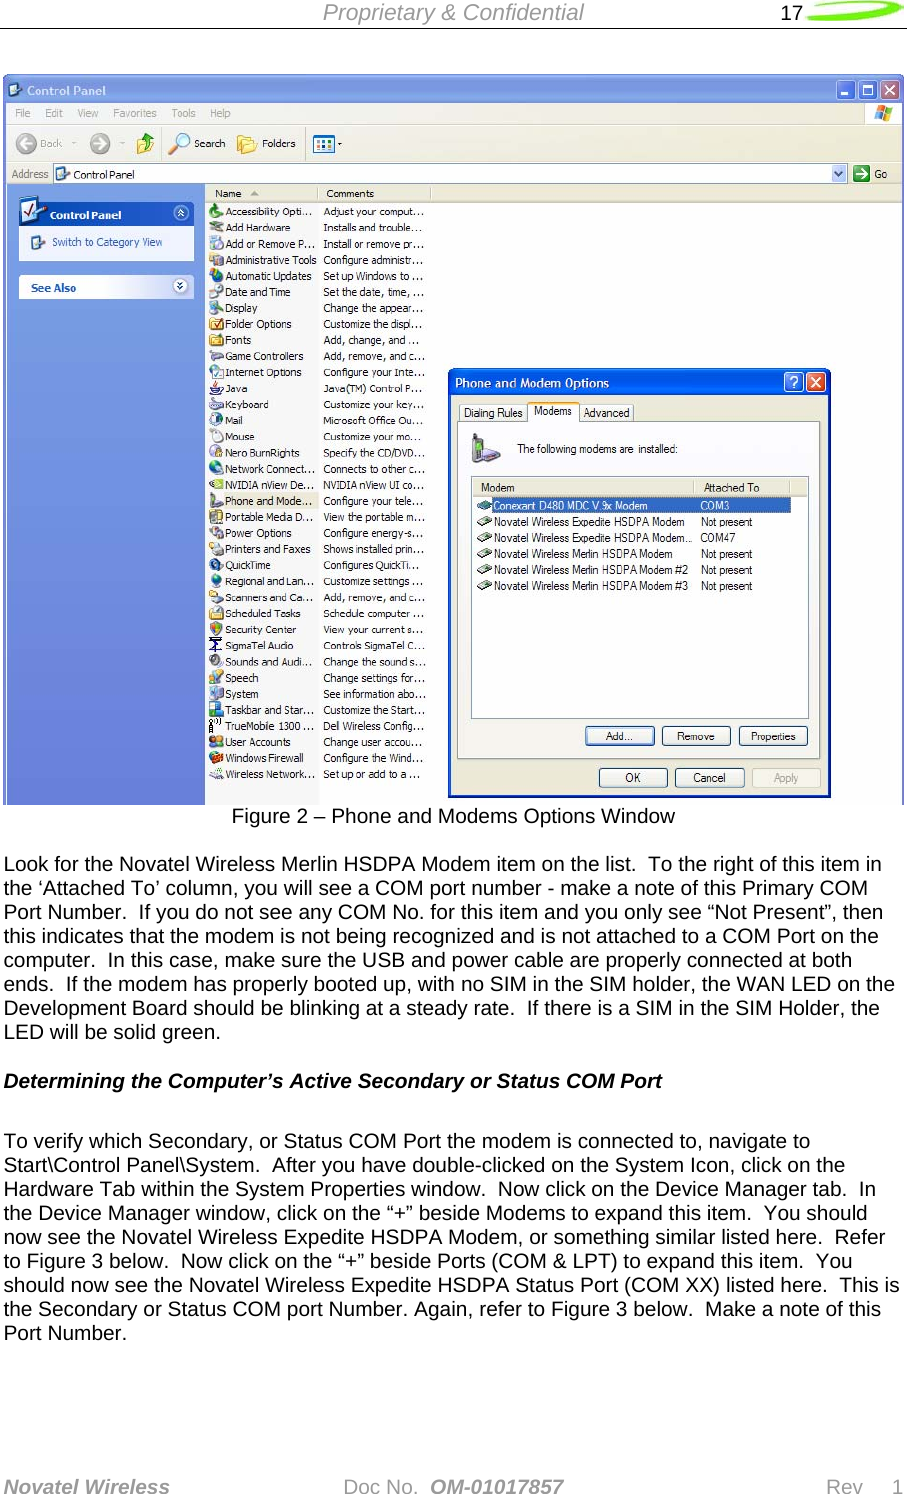  Proprietary &amp; Confidential   17   Novatel Wireless   Doc No.  OM-01017857                              Rev     1   Figure 2 – Phone and Modems Options Window  Look for the Novatel Wireless Merlin HSDPA Modem item on the list.  To the right of this item in the ‘Attached To’ column, you will see a COM port number - make a note of this Primary COM Port Number.  If you do not see any COM No. for this item and you only see “Not Present”, then this indicates that the modem is not being recognized and is not attached to a COM Port on the computer.  In this case, make sure the USB and power cable are properly connected at both ends.  If the modem has properly booted up, with no SIM in the SIM holder, the WAN LED on the Development Board should be blinking at a steady rate.  If there is a SIM in the SIM Holder, the LED will be solid green.  Determining the Computer’s Active Secondary or Status COM Port  To verify which Secondary, or Status COM Port the modem is connected to, navigate to Start\Control Panel\System.  After you have double-clicked on the System Icon, click on the Hardware Tab within the System Properties window.  Now click on the Device Manager tab.  In the Device Manager window, click on the “+” beside Modems to expand this item.  You should now see the Novatel Wireless Expedite HSDPA Modem, or something similar listed here.  Refer to Figure 3 below.  Now click on the “+” beside Ports (COM &amp; LPT) to expand this item.  You should now see the Novatel Wireless Expedite HSDPA Status Port (COM XX) listed here.  This is the Secondary or Status COM port Number. Again, refer to Figure 3 below.  Make a note of this Port Number.  